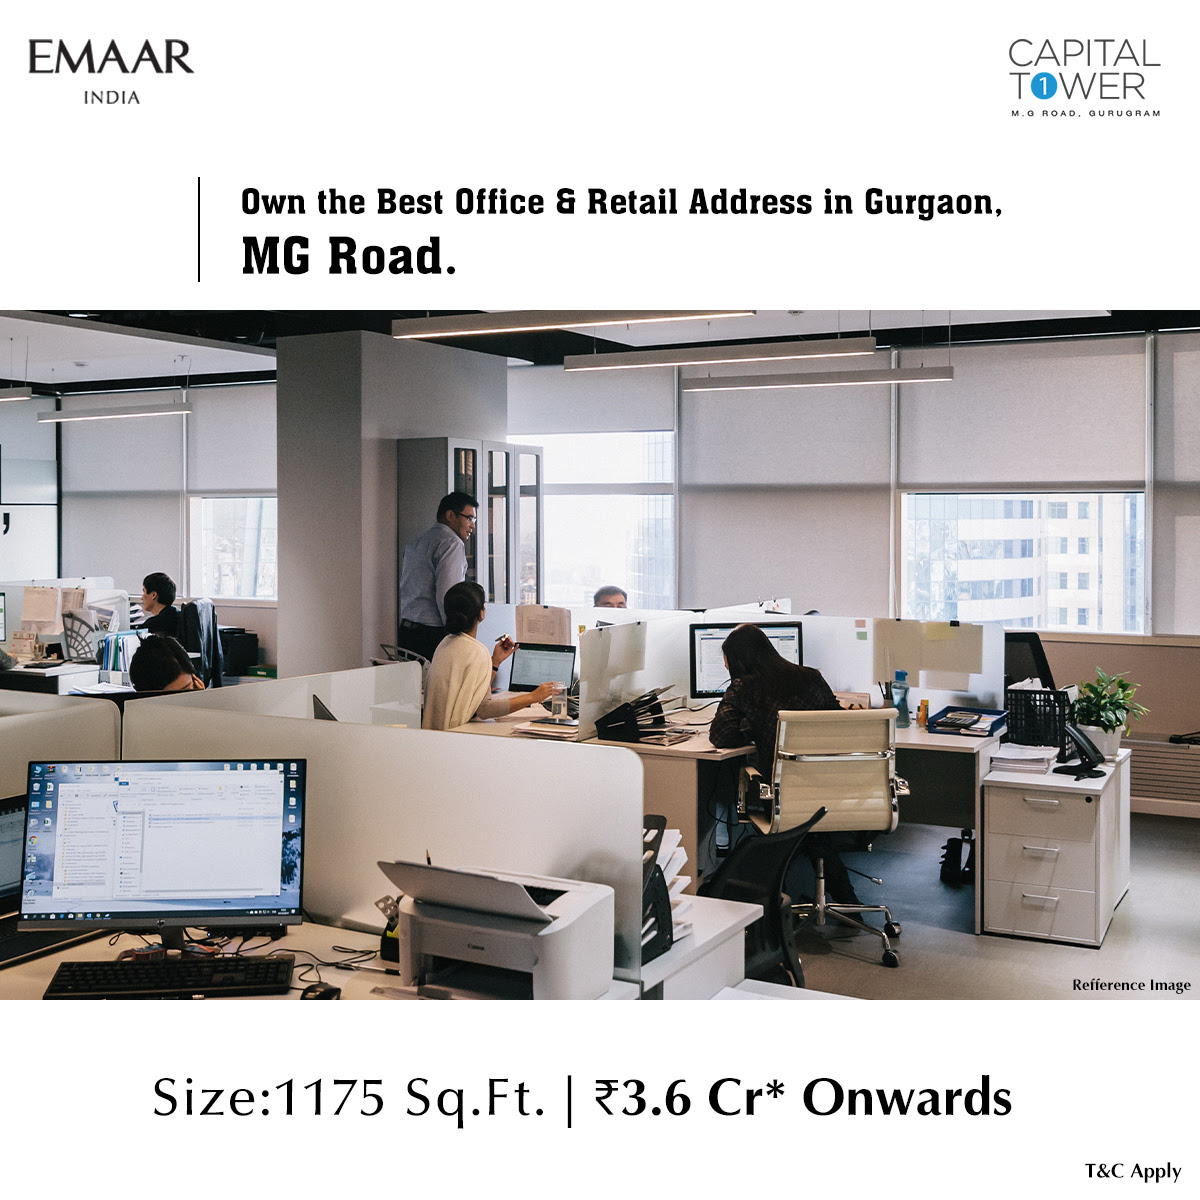 Ground floor retail units ranging 1175 price Rs  3.6 Cr. limited inventory at Emaar Capital Towers, Gurgaon